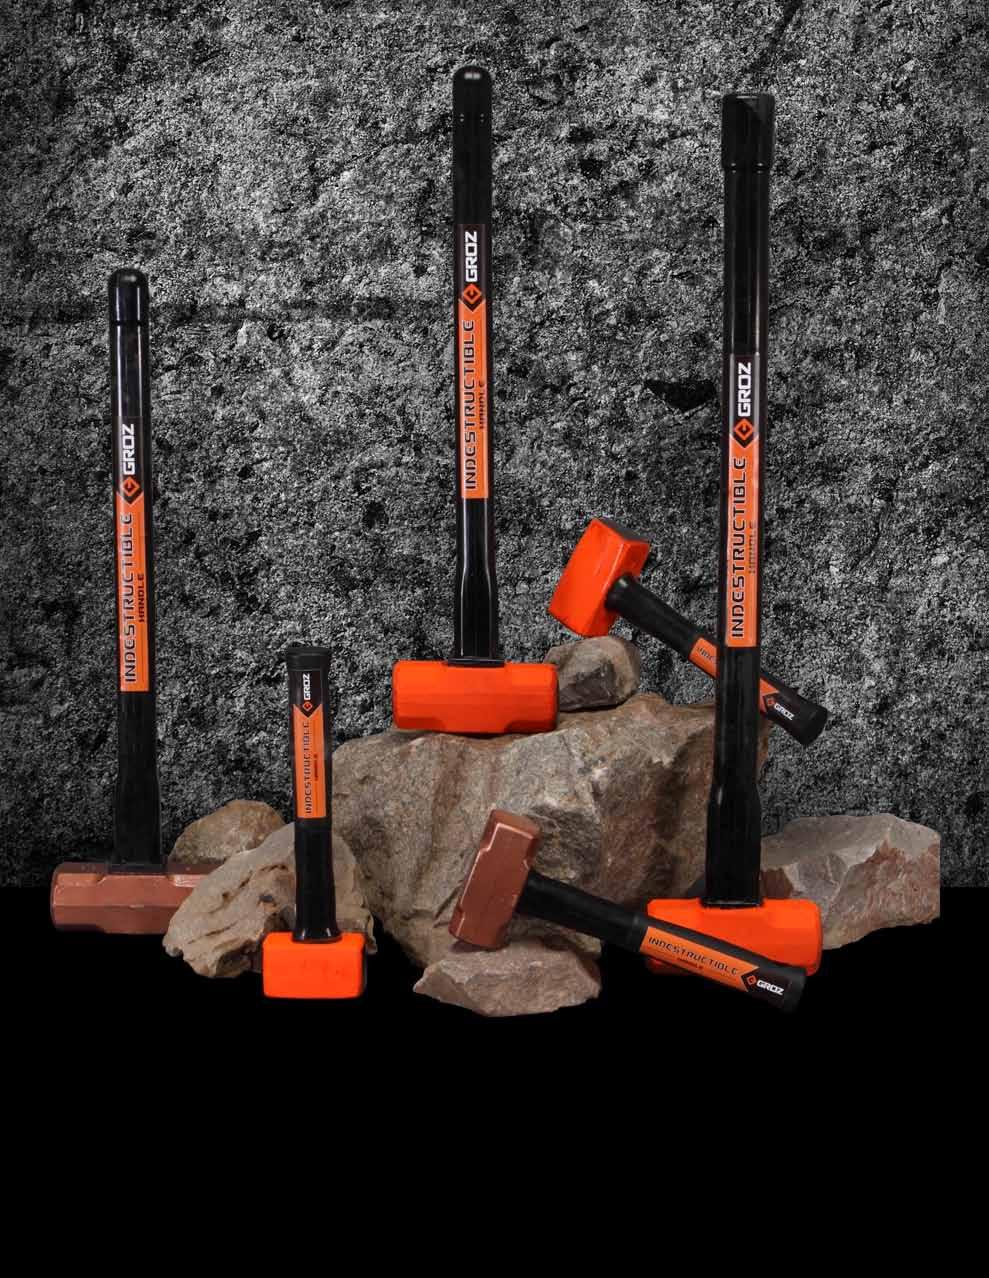 The Worlds most Cost Effective Sledge Hammers! Sledge Hammers are used, abused & misused day-in & day-out.